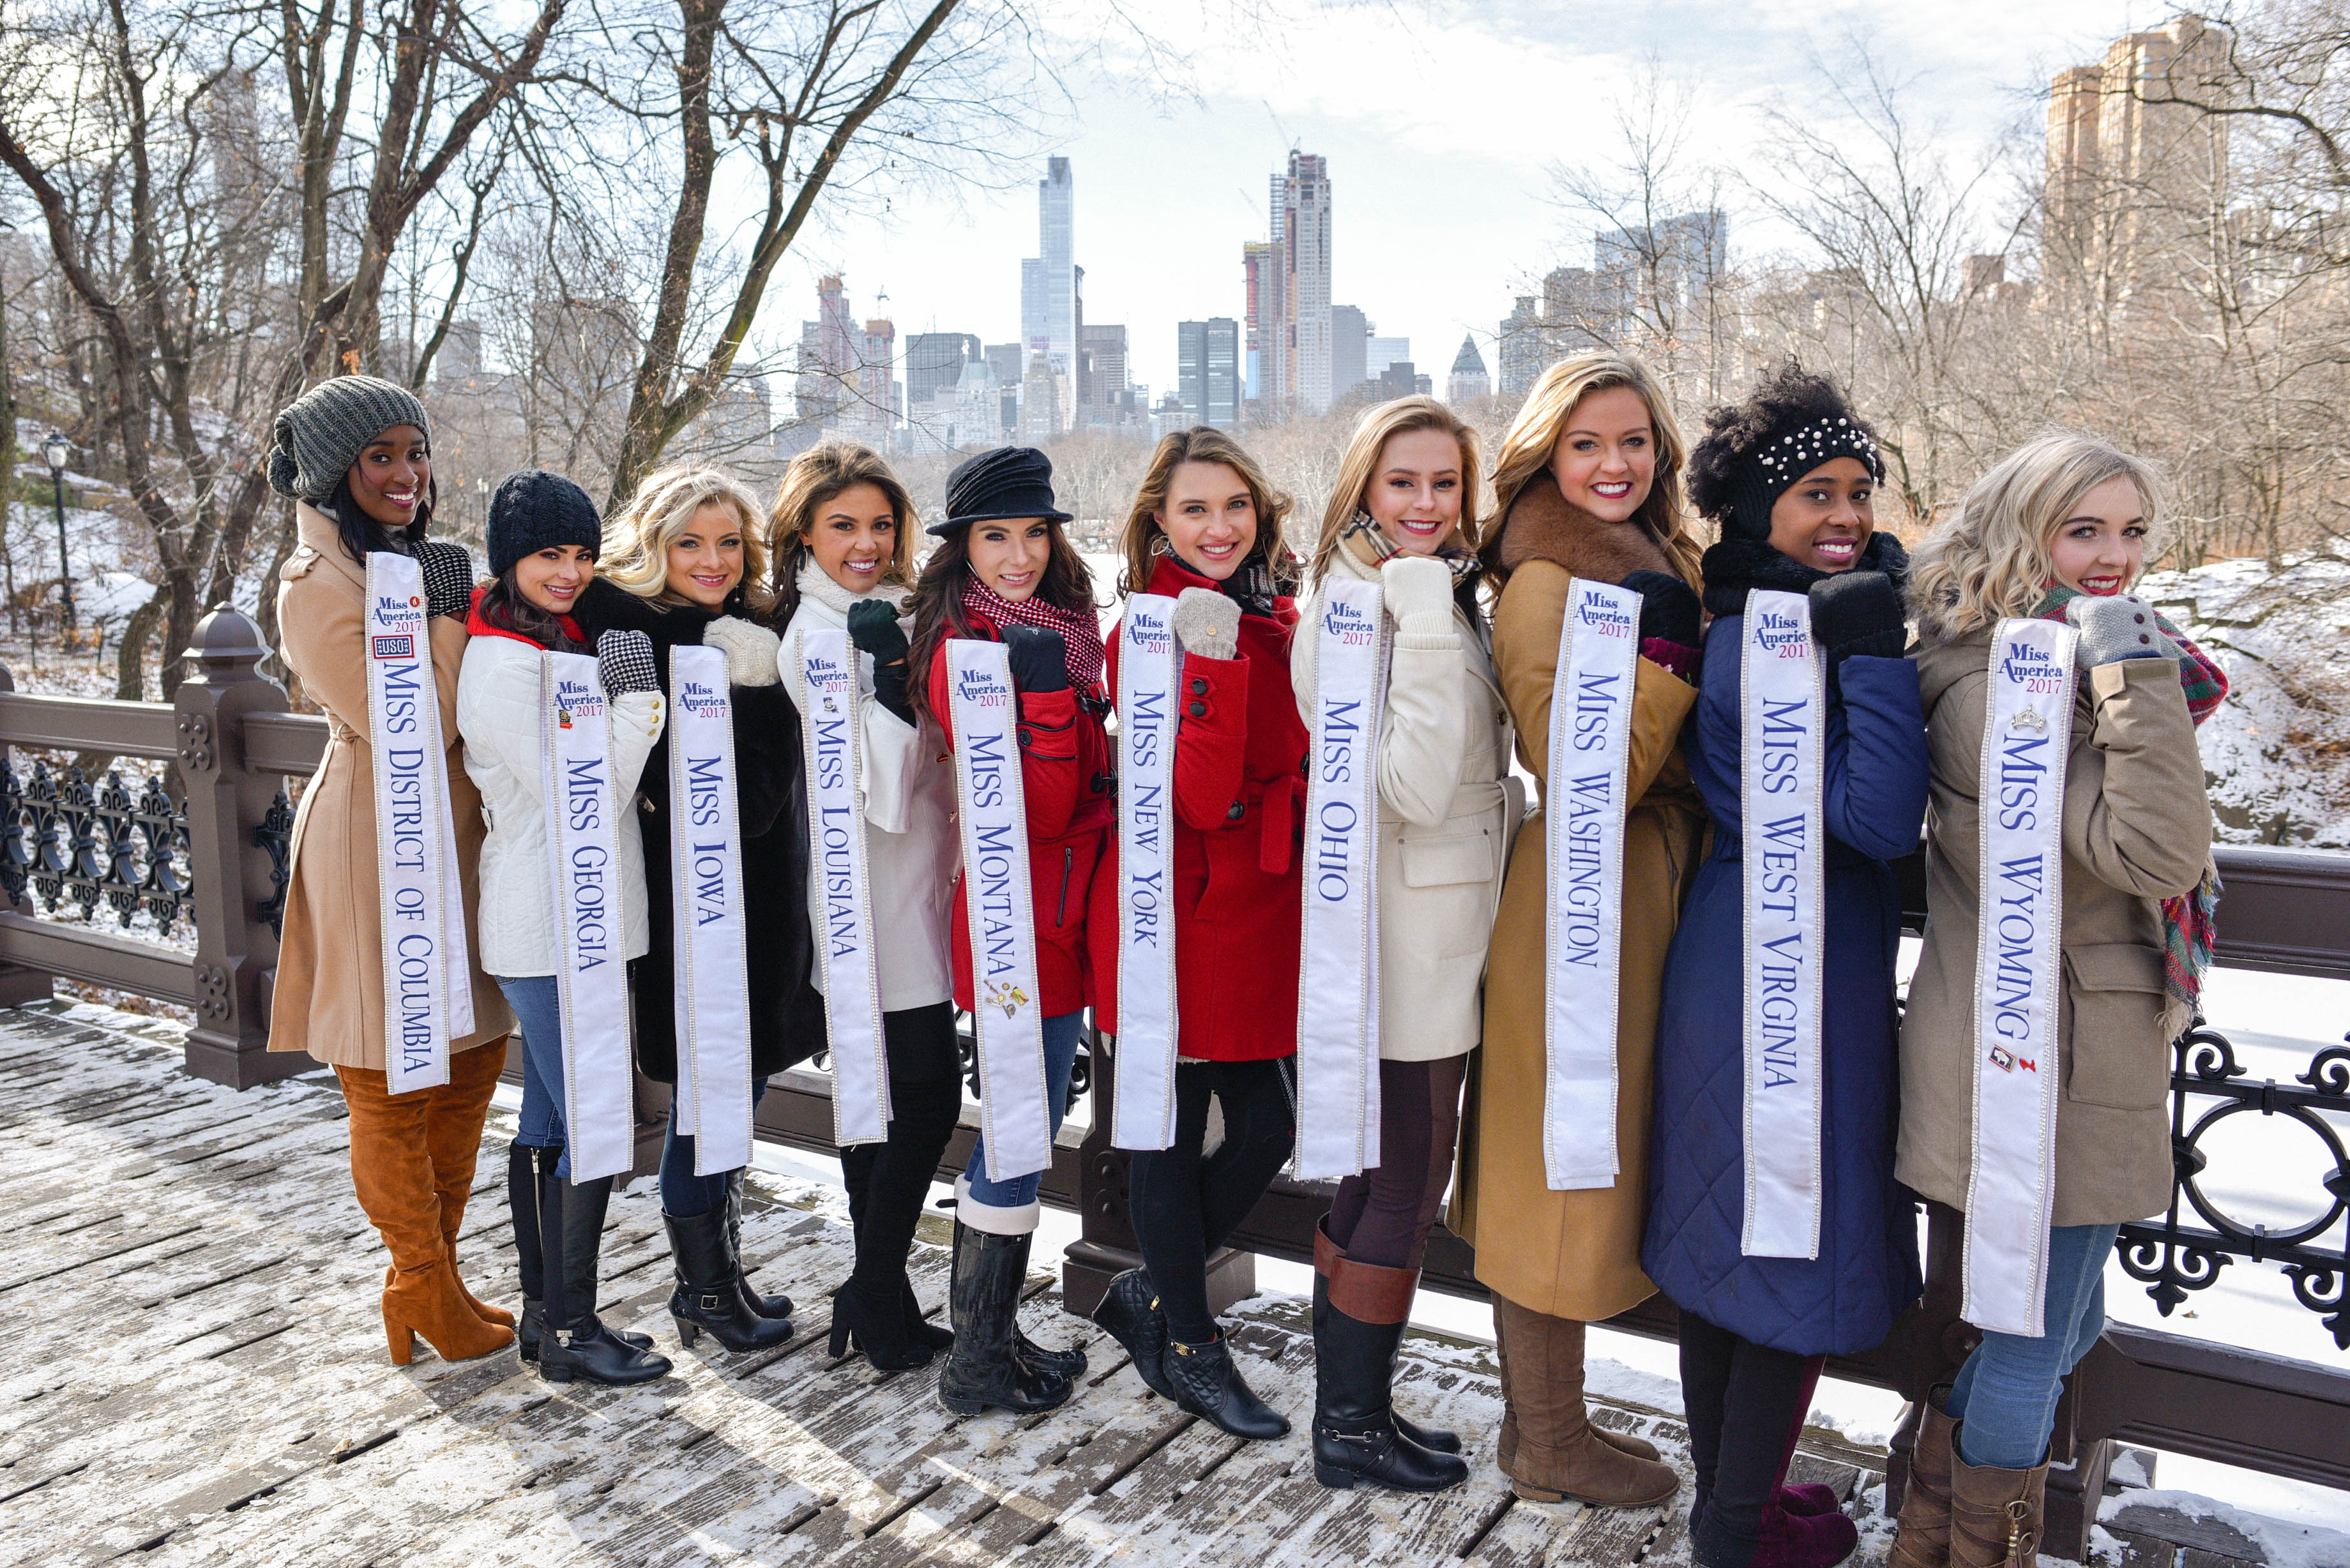 Miss America Reunion – New York City for New Years Eve